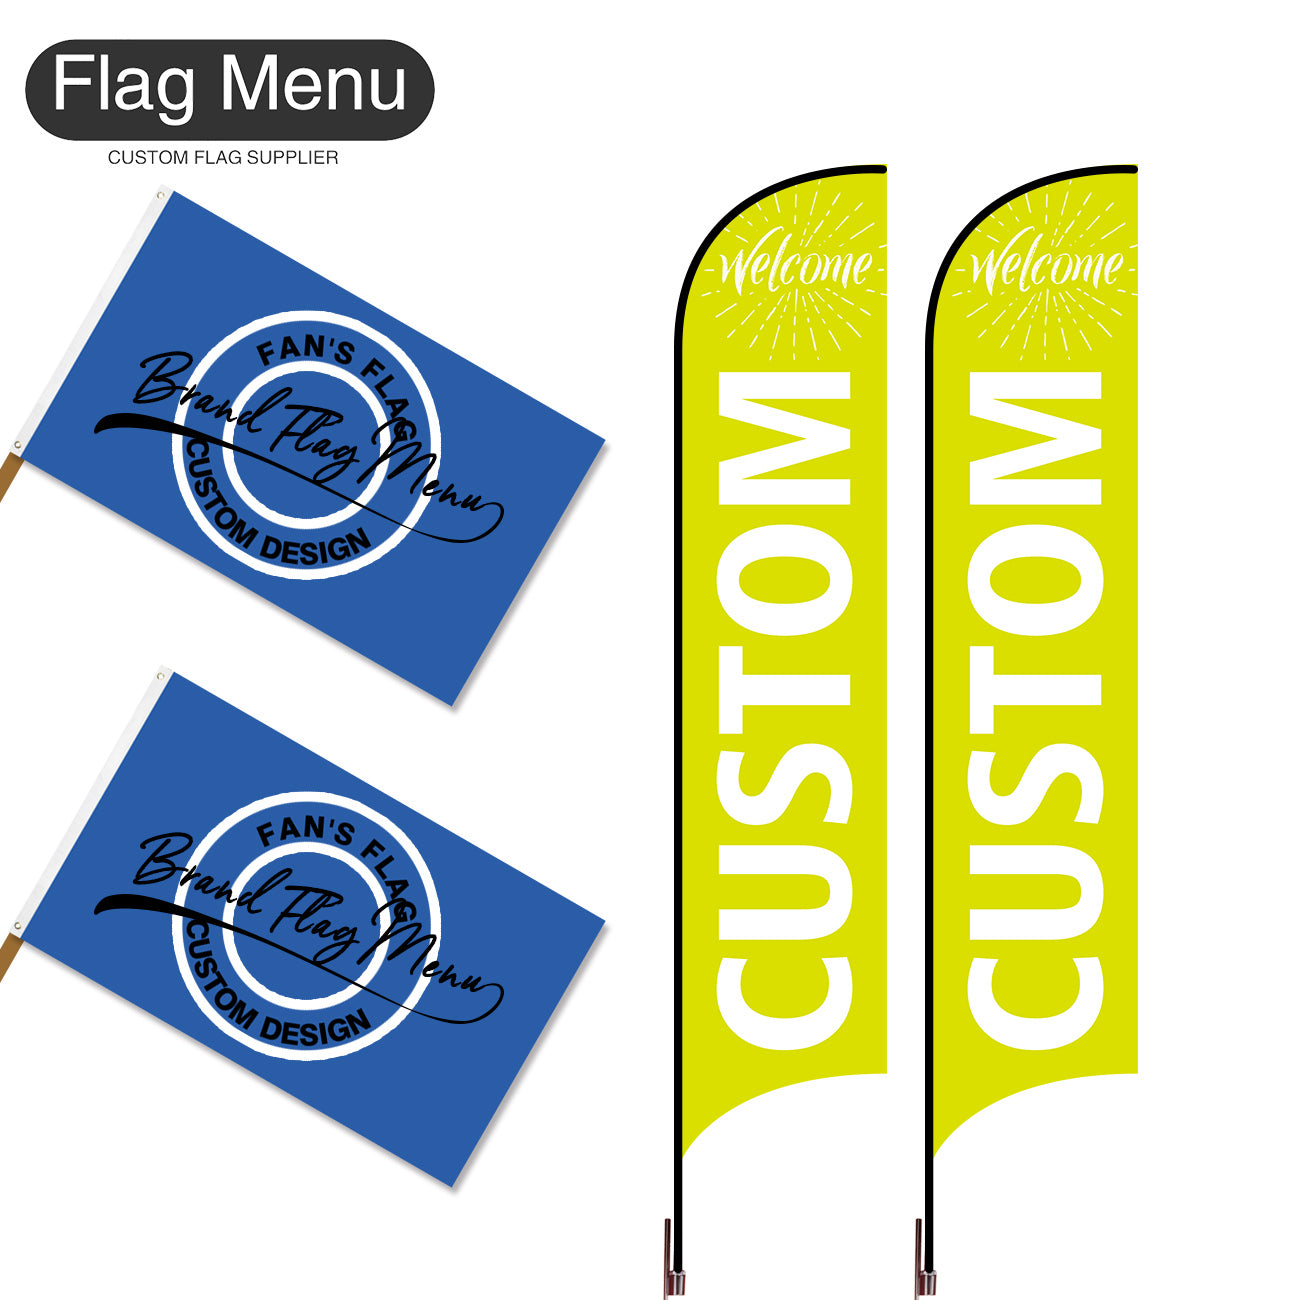 Outdoor Advertising Set - C-Green A-S - Feather Flag -Double Sided & 3'x5' Regular Flag -Single Sided-Cross & Water Bag-Flag Menu